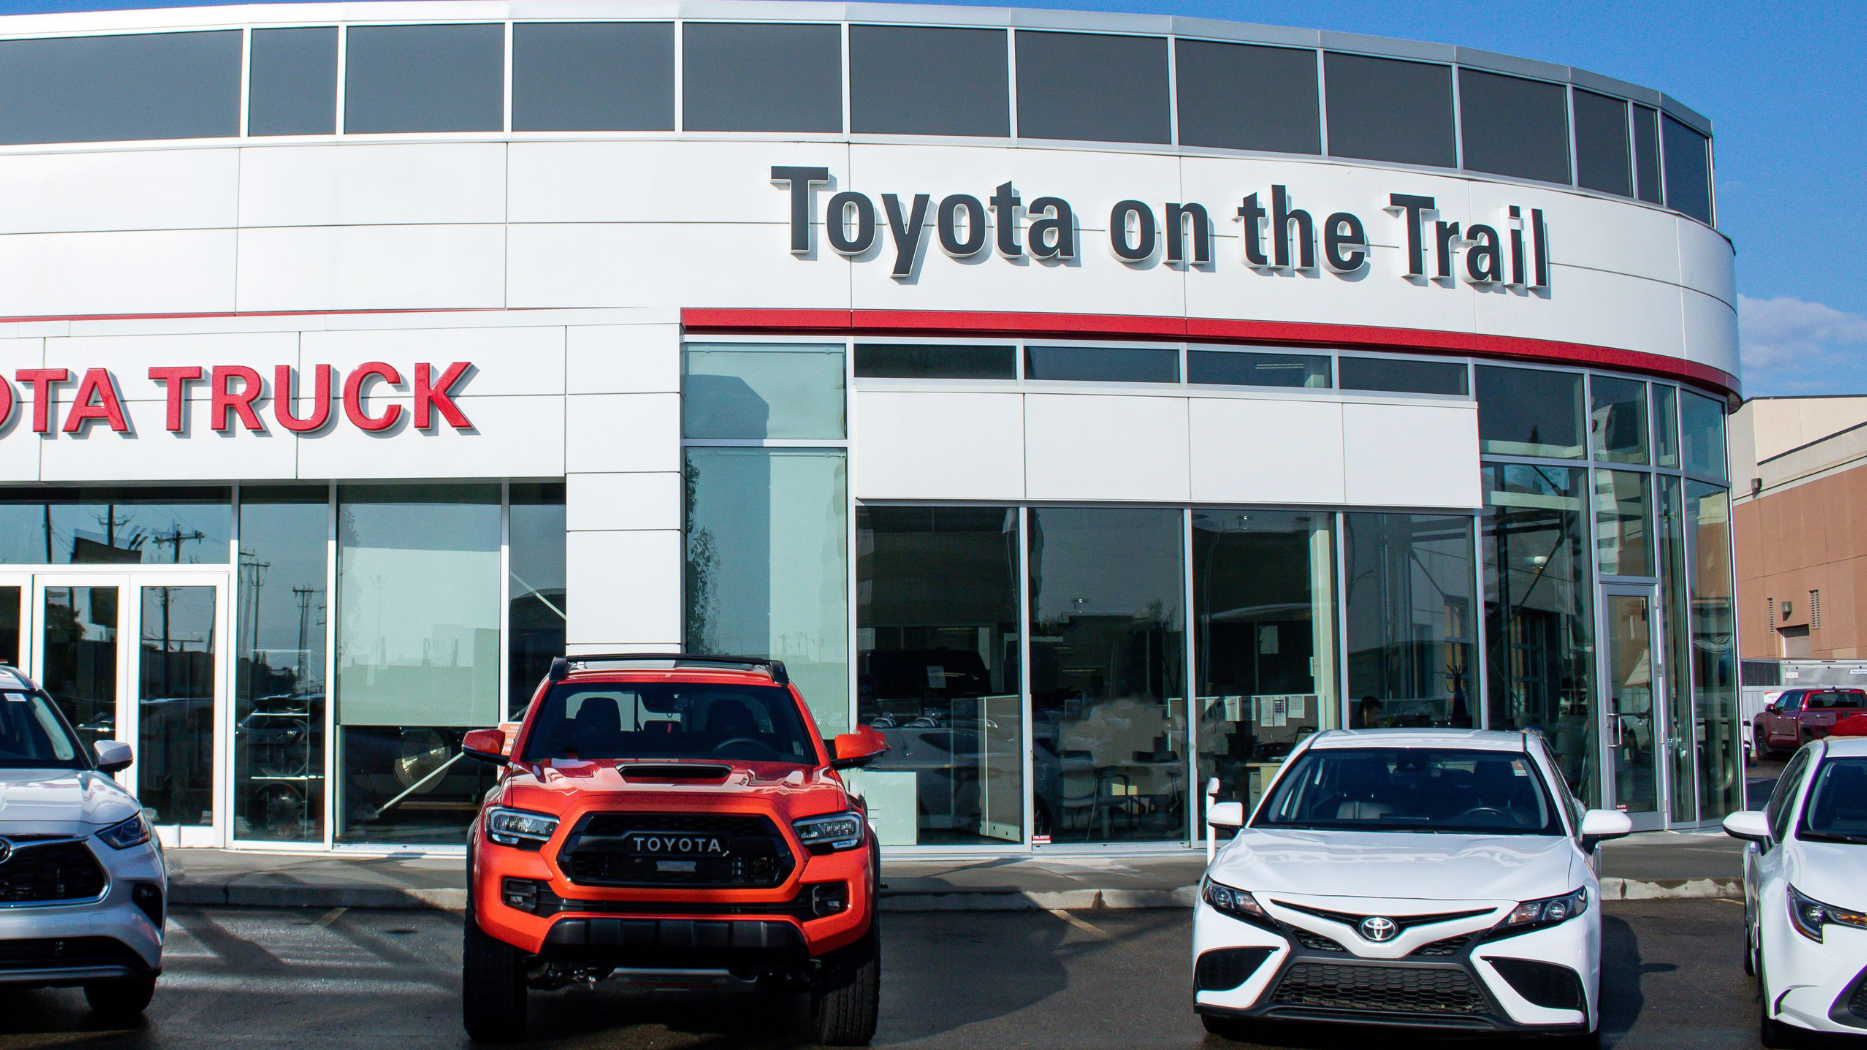 The outside of Toyota on the Trail car dealership in Edmonton. It has multiple Toyotas parked in front of it.